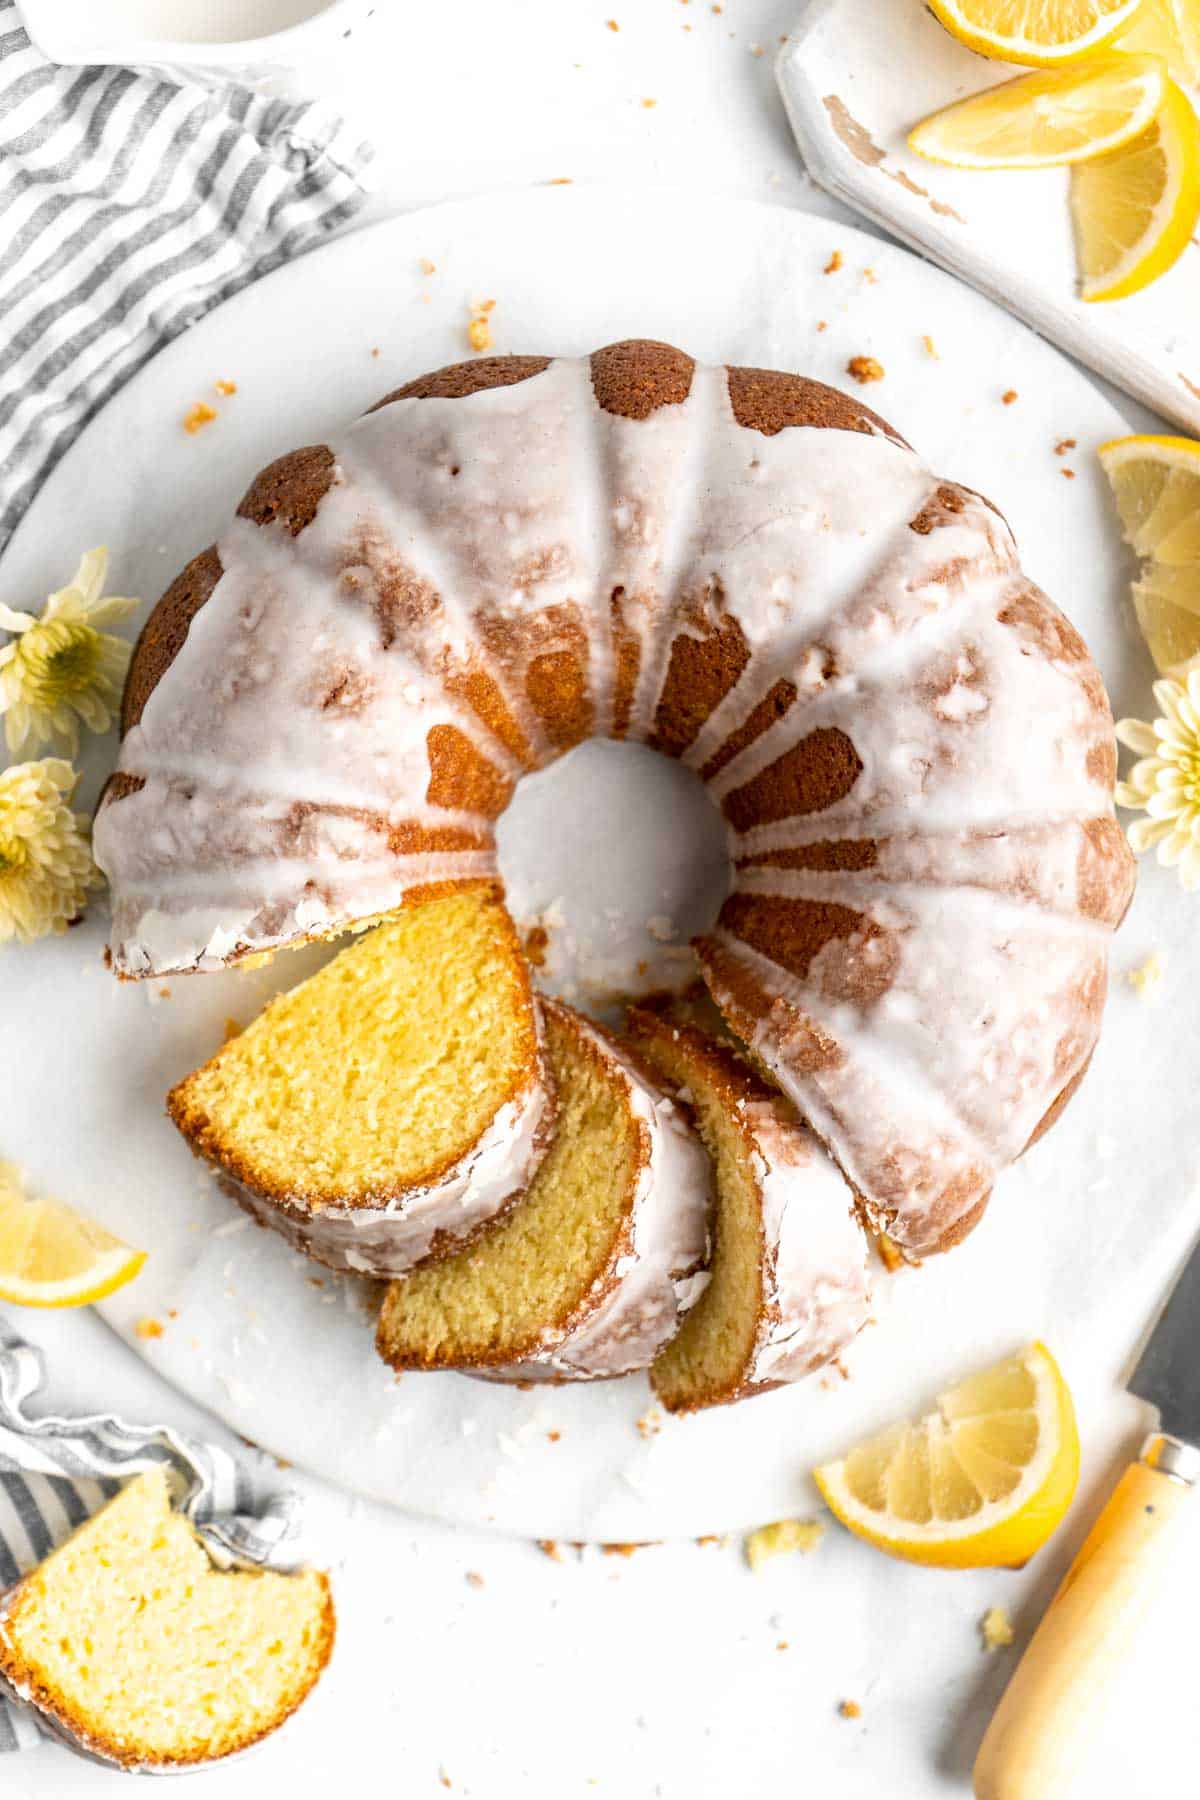 Lemon Bundt Cake with a sweet vanilla glaze is light, fluffy, and moist with a perfect golden brown crumb and made with real lemons. | aheadofthyme.com